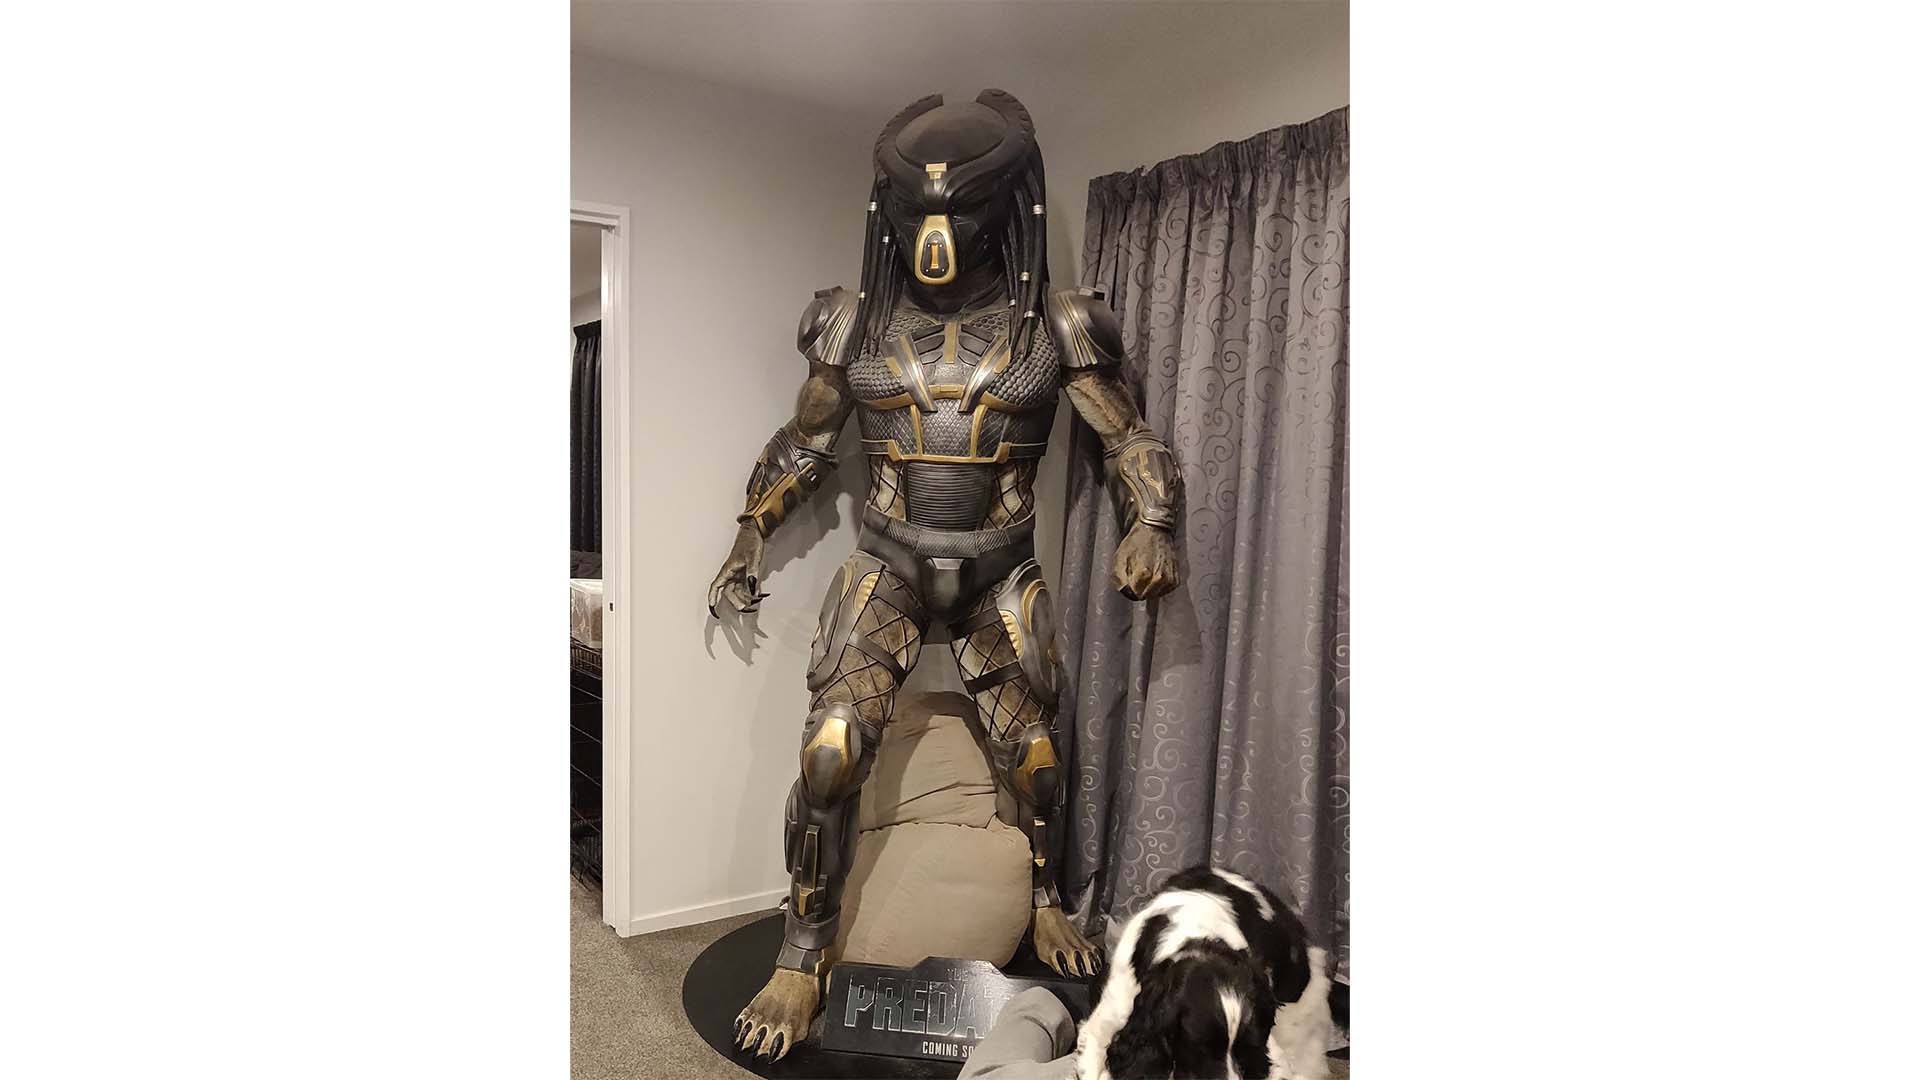 A towering 2.3m tall Predator Statue, a unique item on Trade Me, finds a new owner.